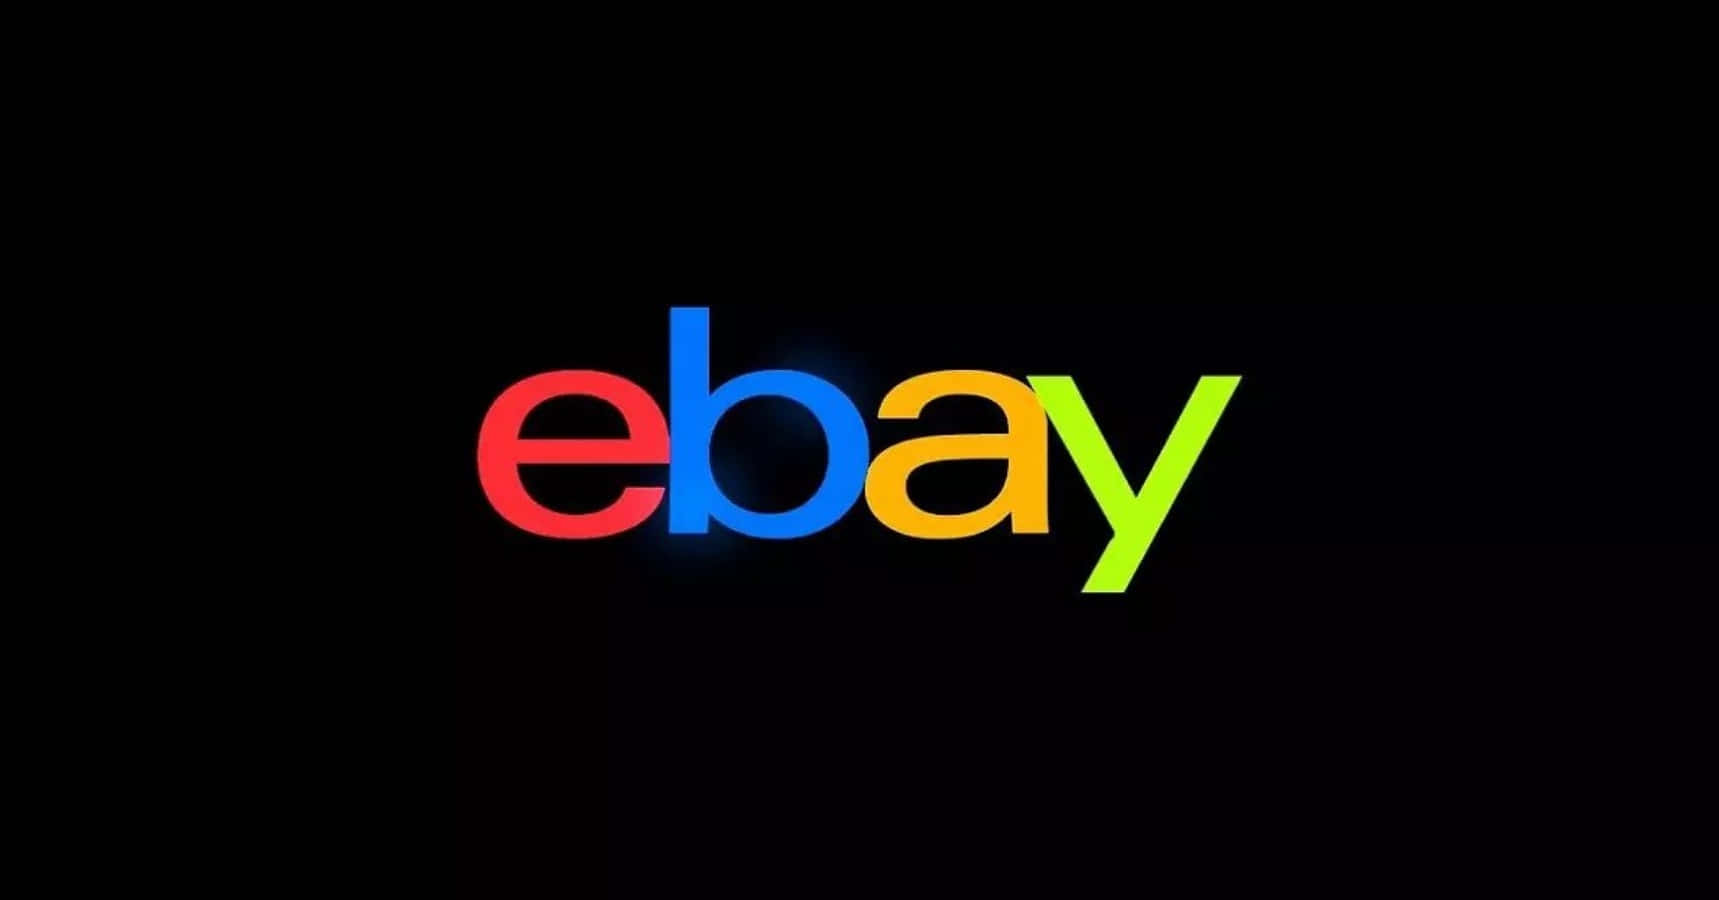 Find What You're Looking For On Ebay